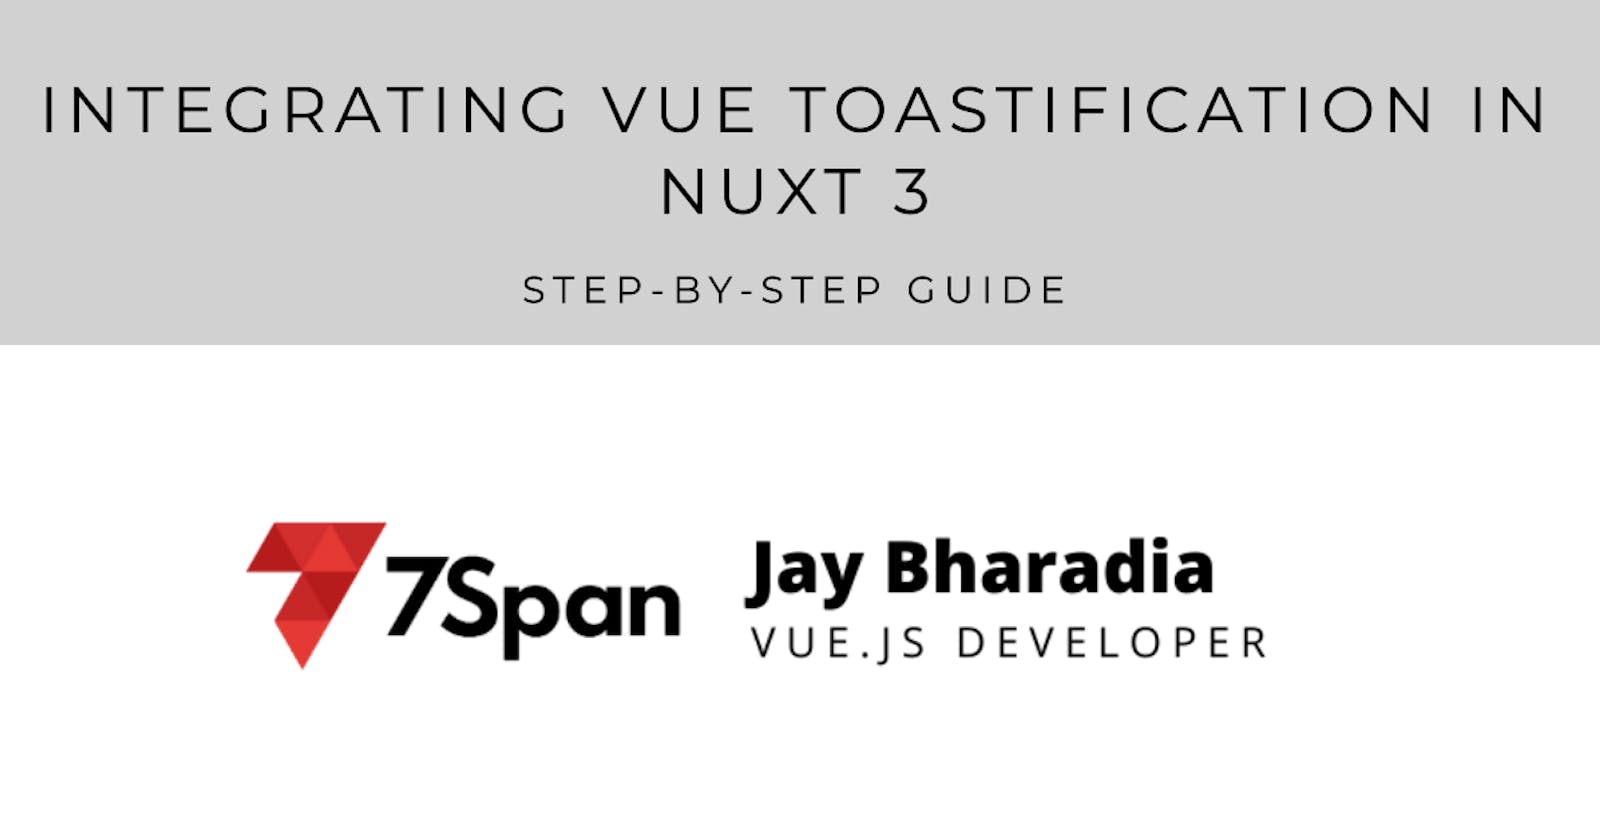 How to integrate Vue Toastification in Nuxt 3